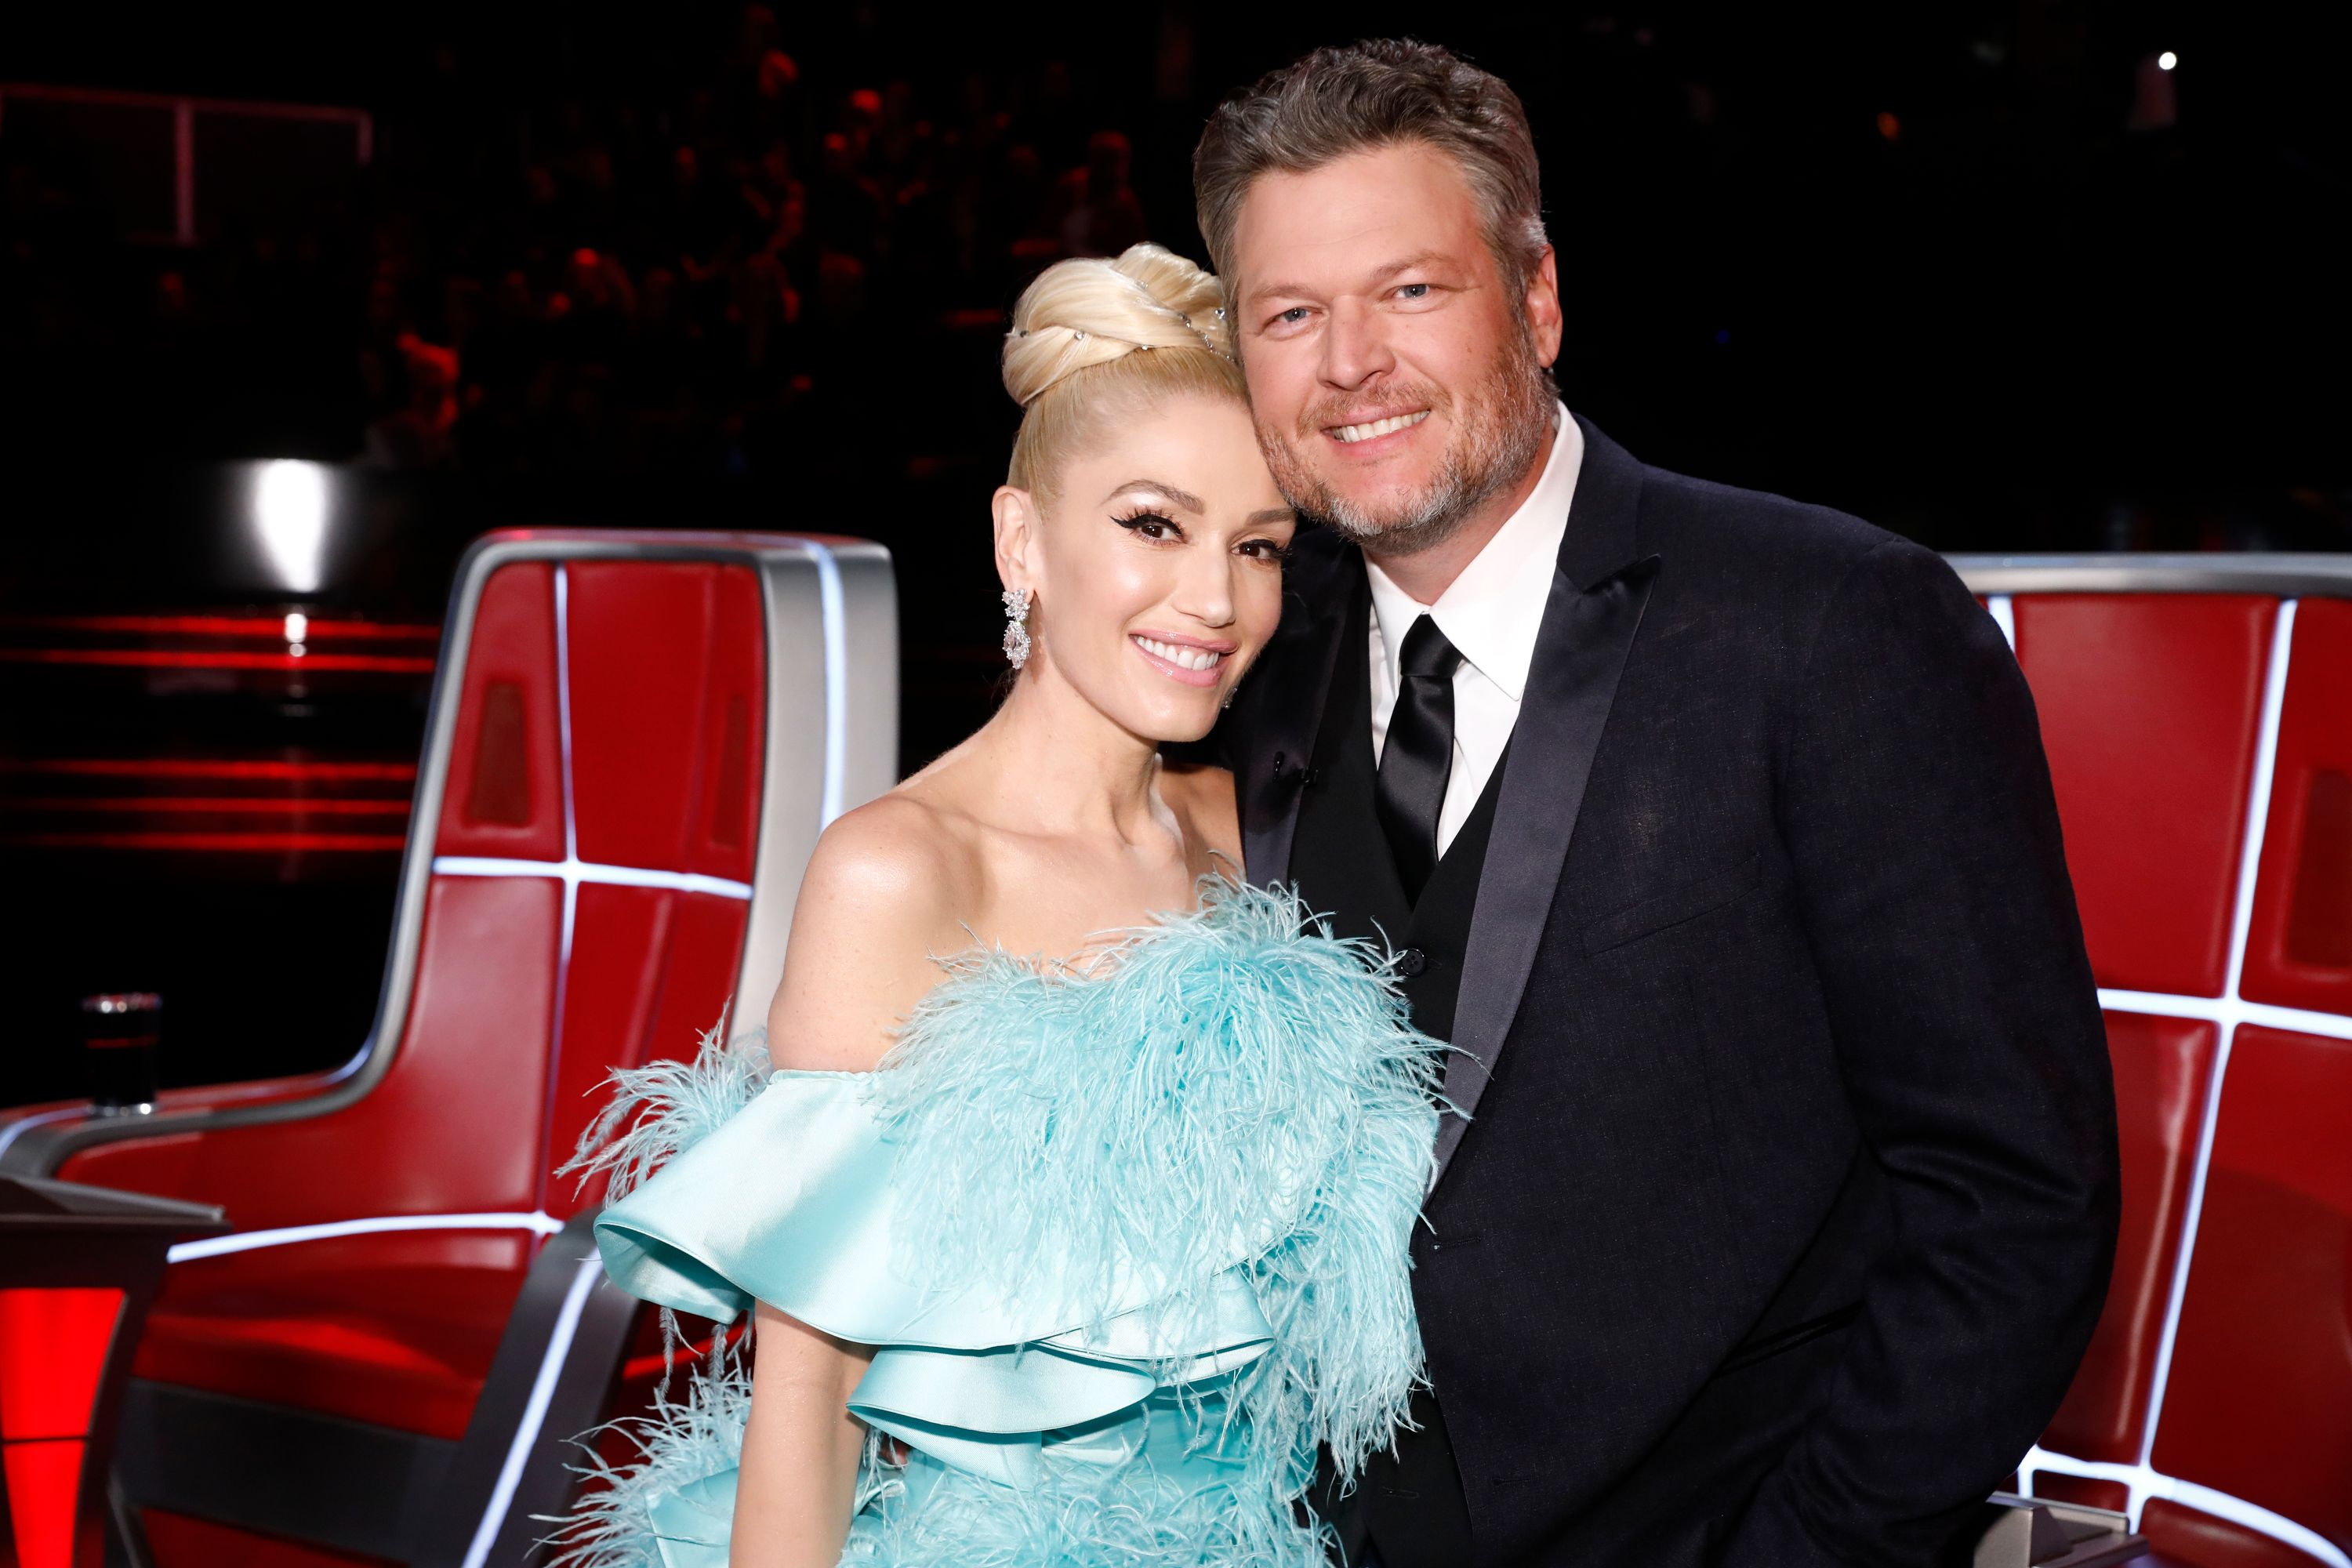 Gwen Stefani and Blake Shelton posed at "The Voice" studio, the 17th season on 17 December, 2019 | Photo: Getty Images